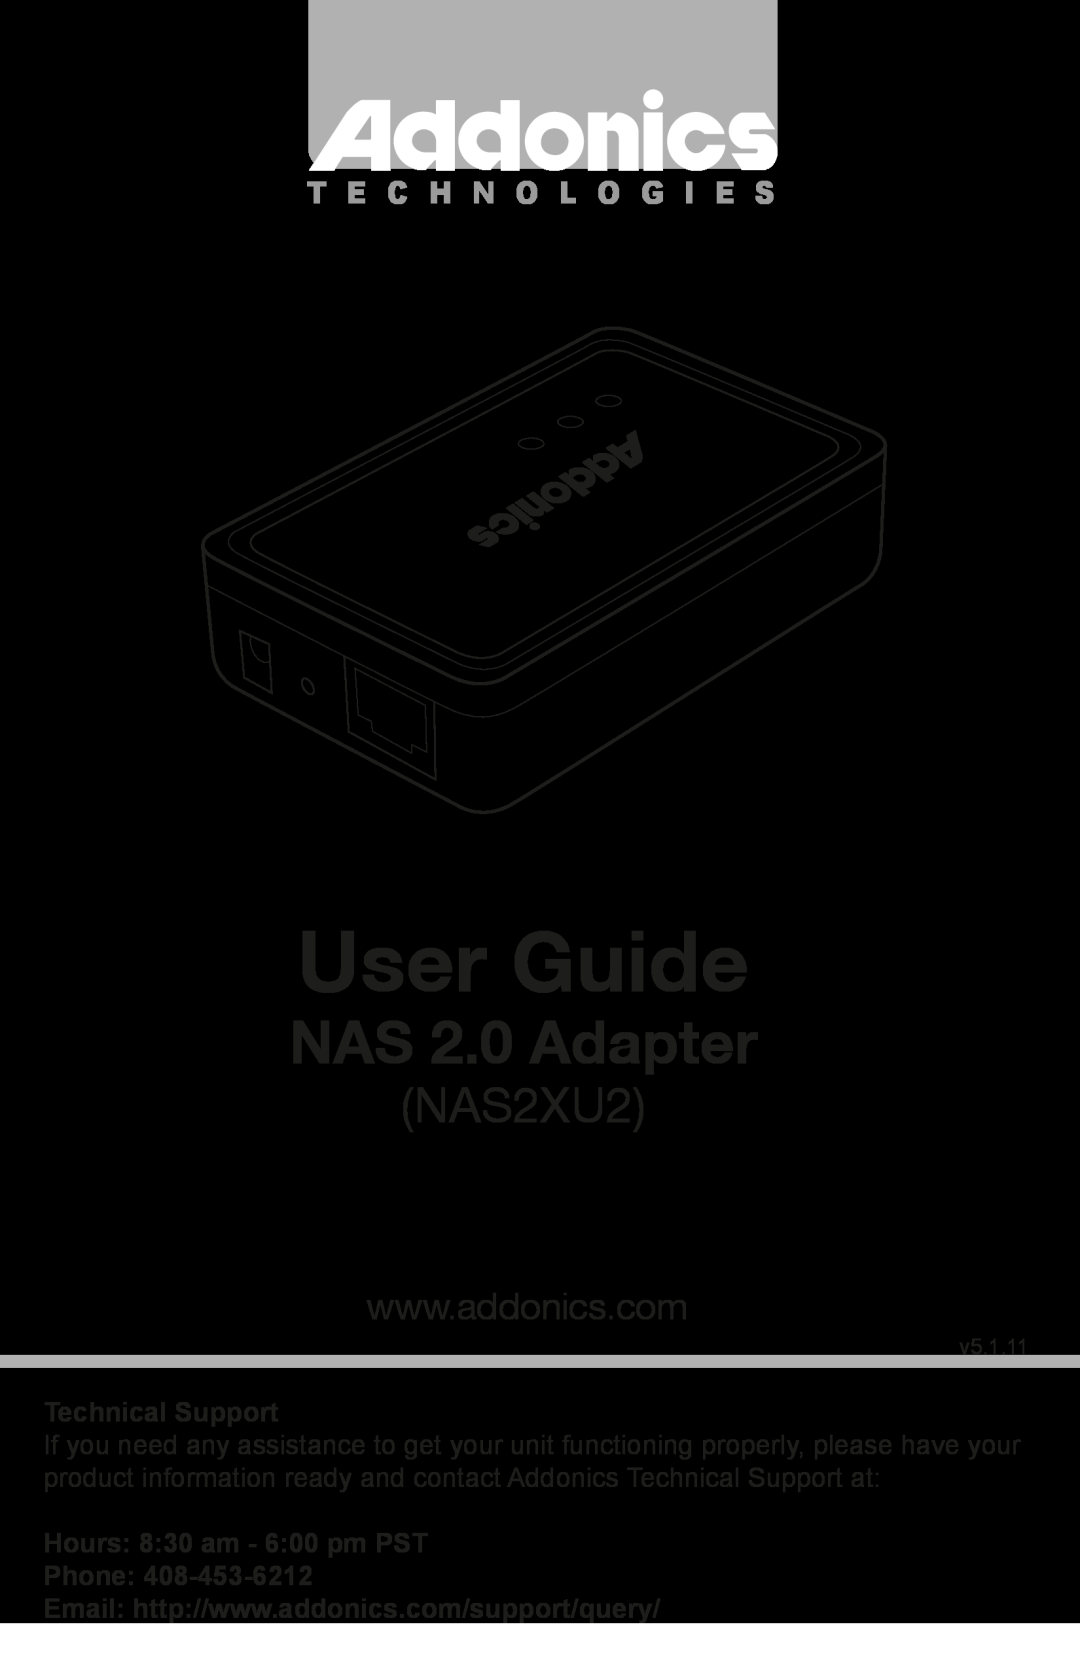 Addonics Technologies NAS2XU2 manual Technical Support, Hours 830 am - 600 pm PST Phone, User Guide, NAS 2.0 Adapter 